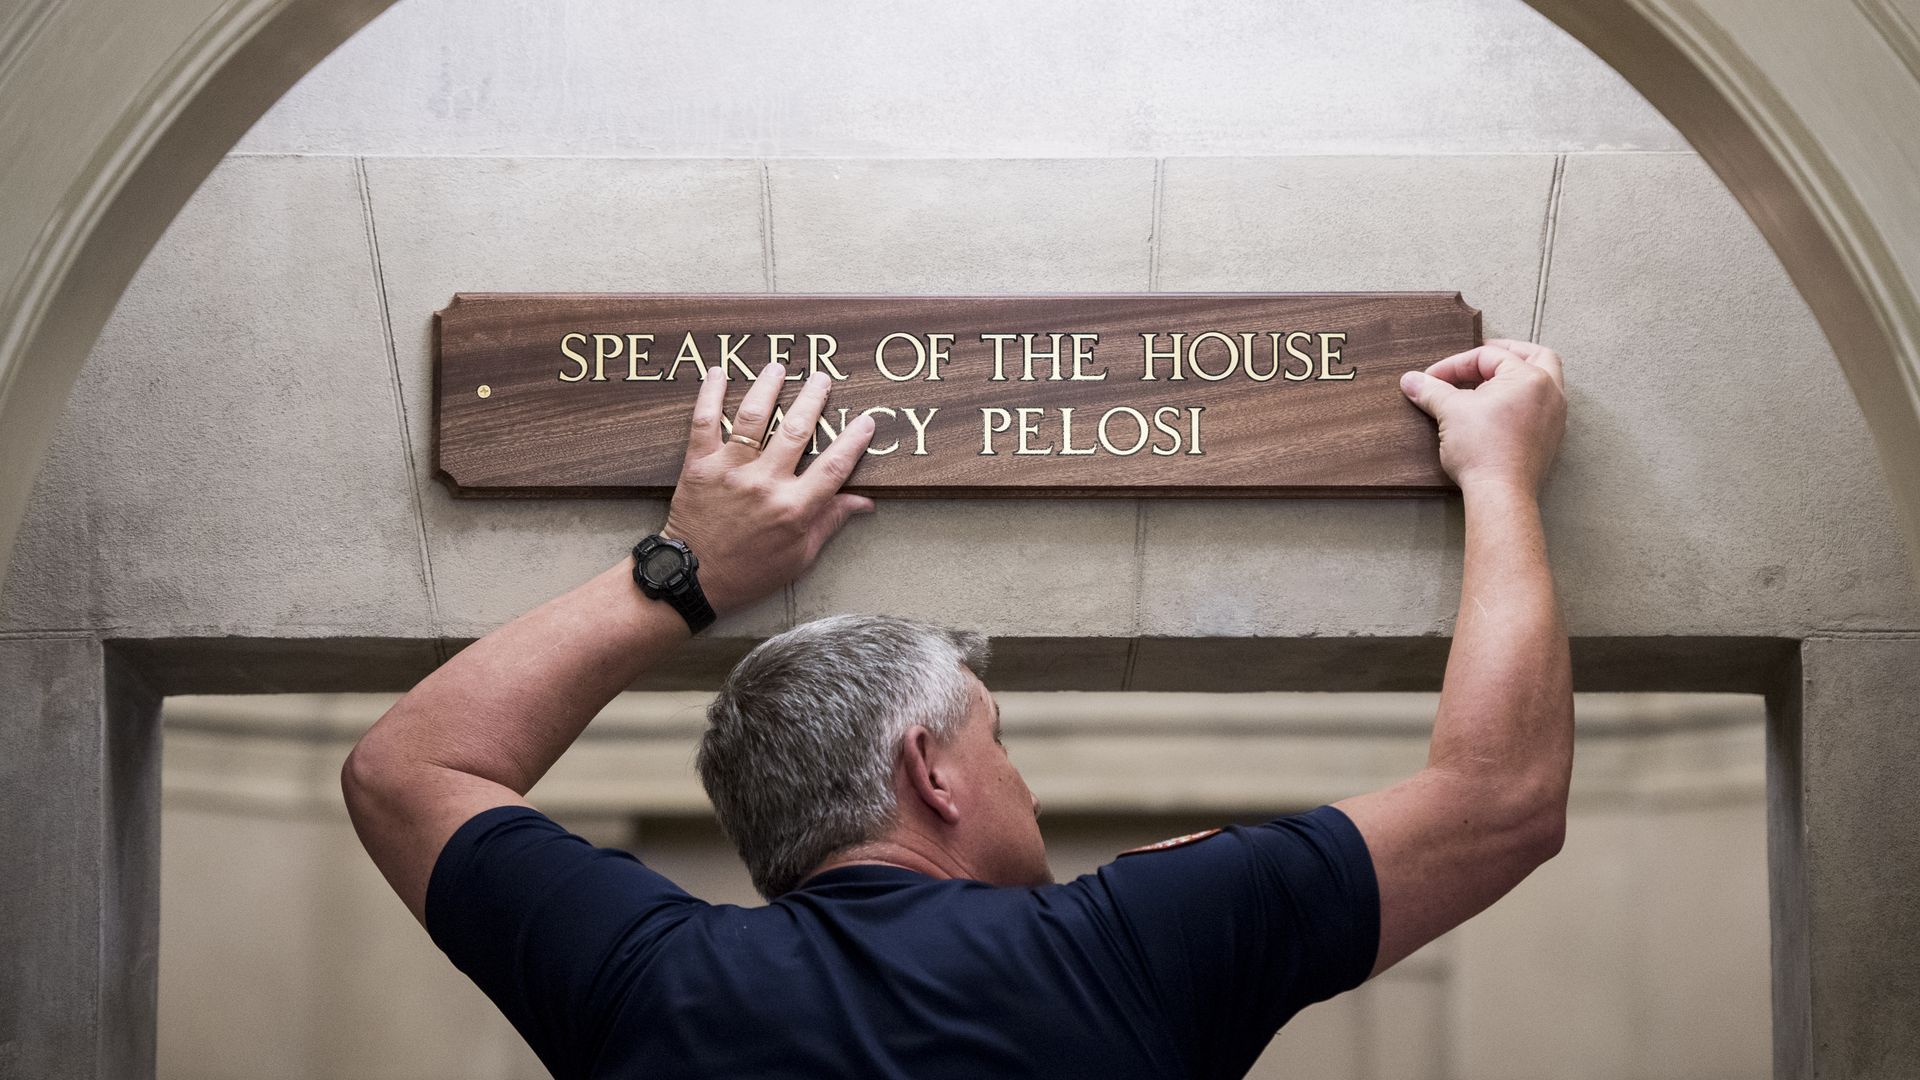 Worker puts up Nancy Pelosi Speaker of the House plaque.